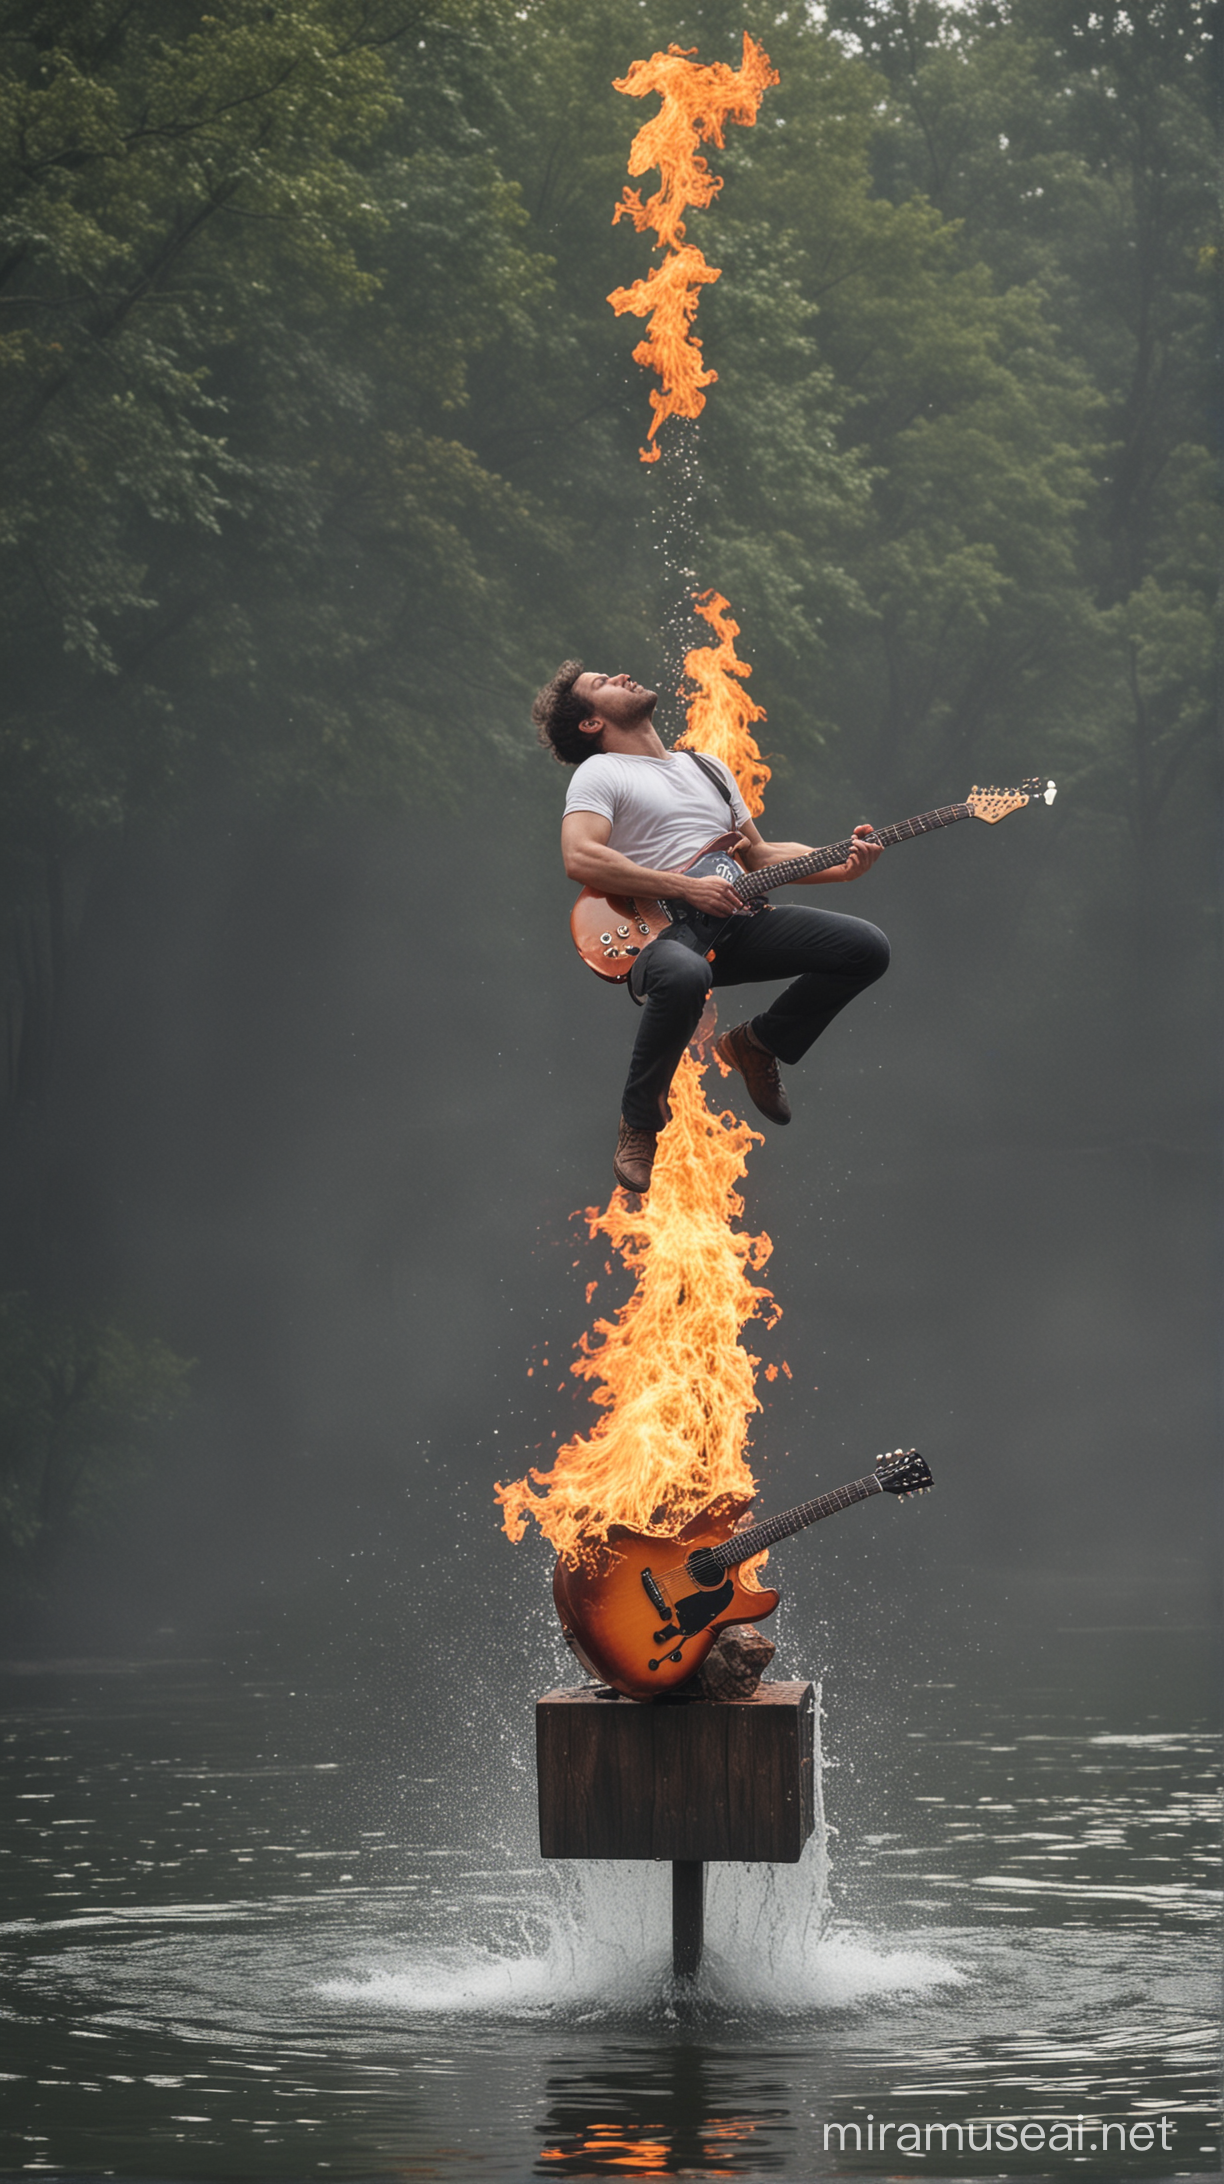 Guitarist Levitating over Fiery Waters